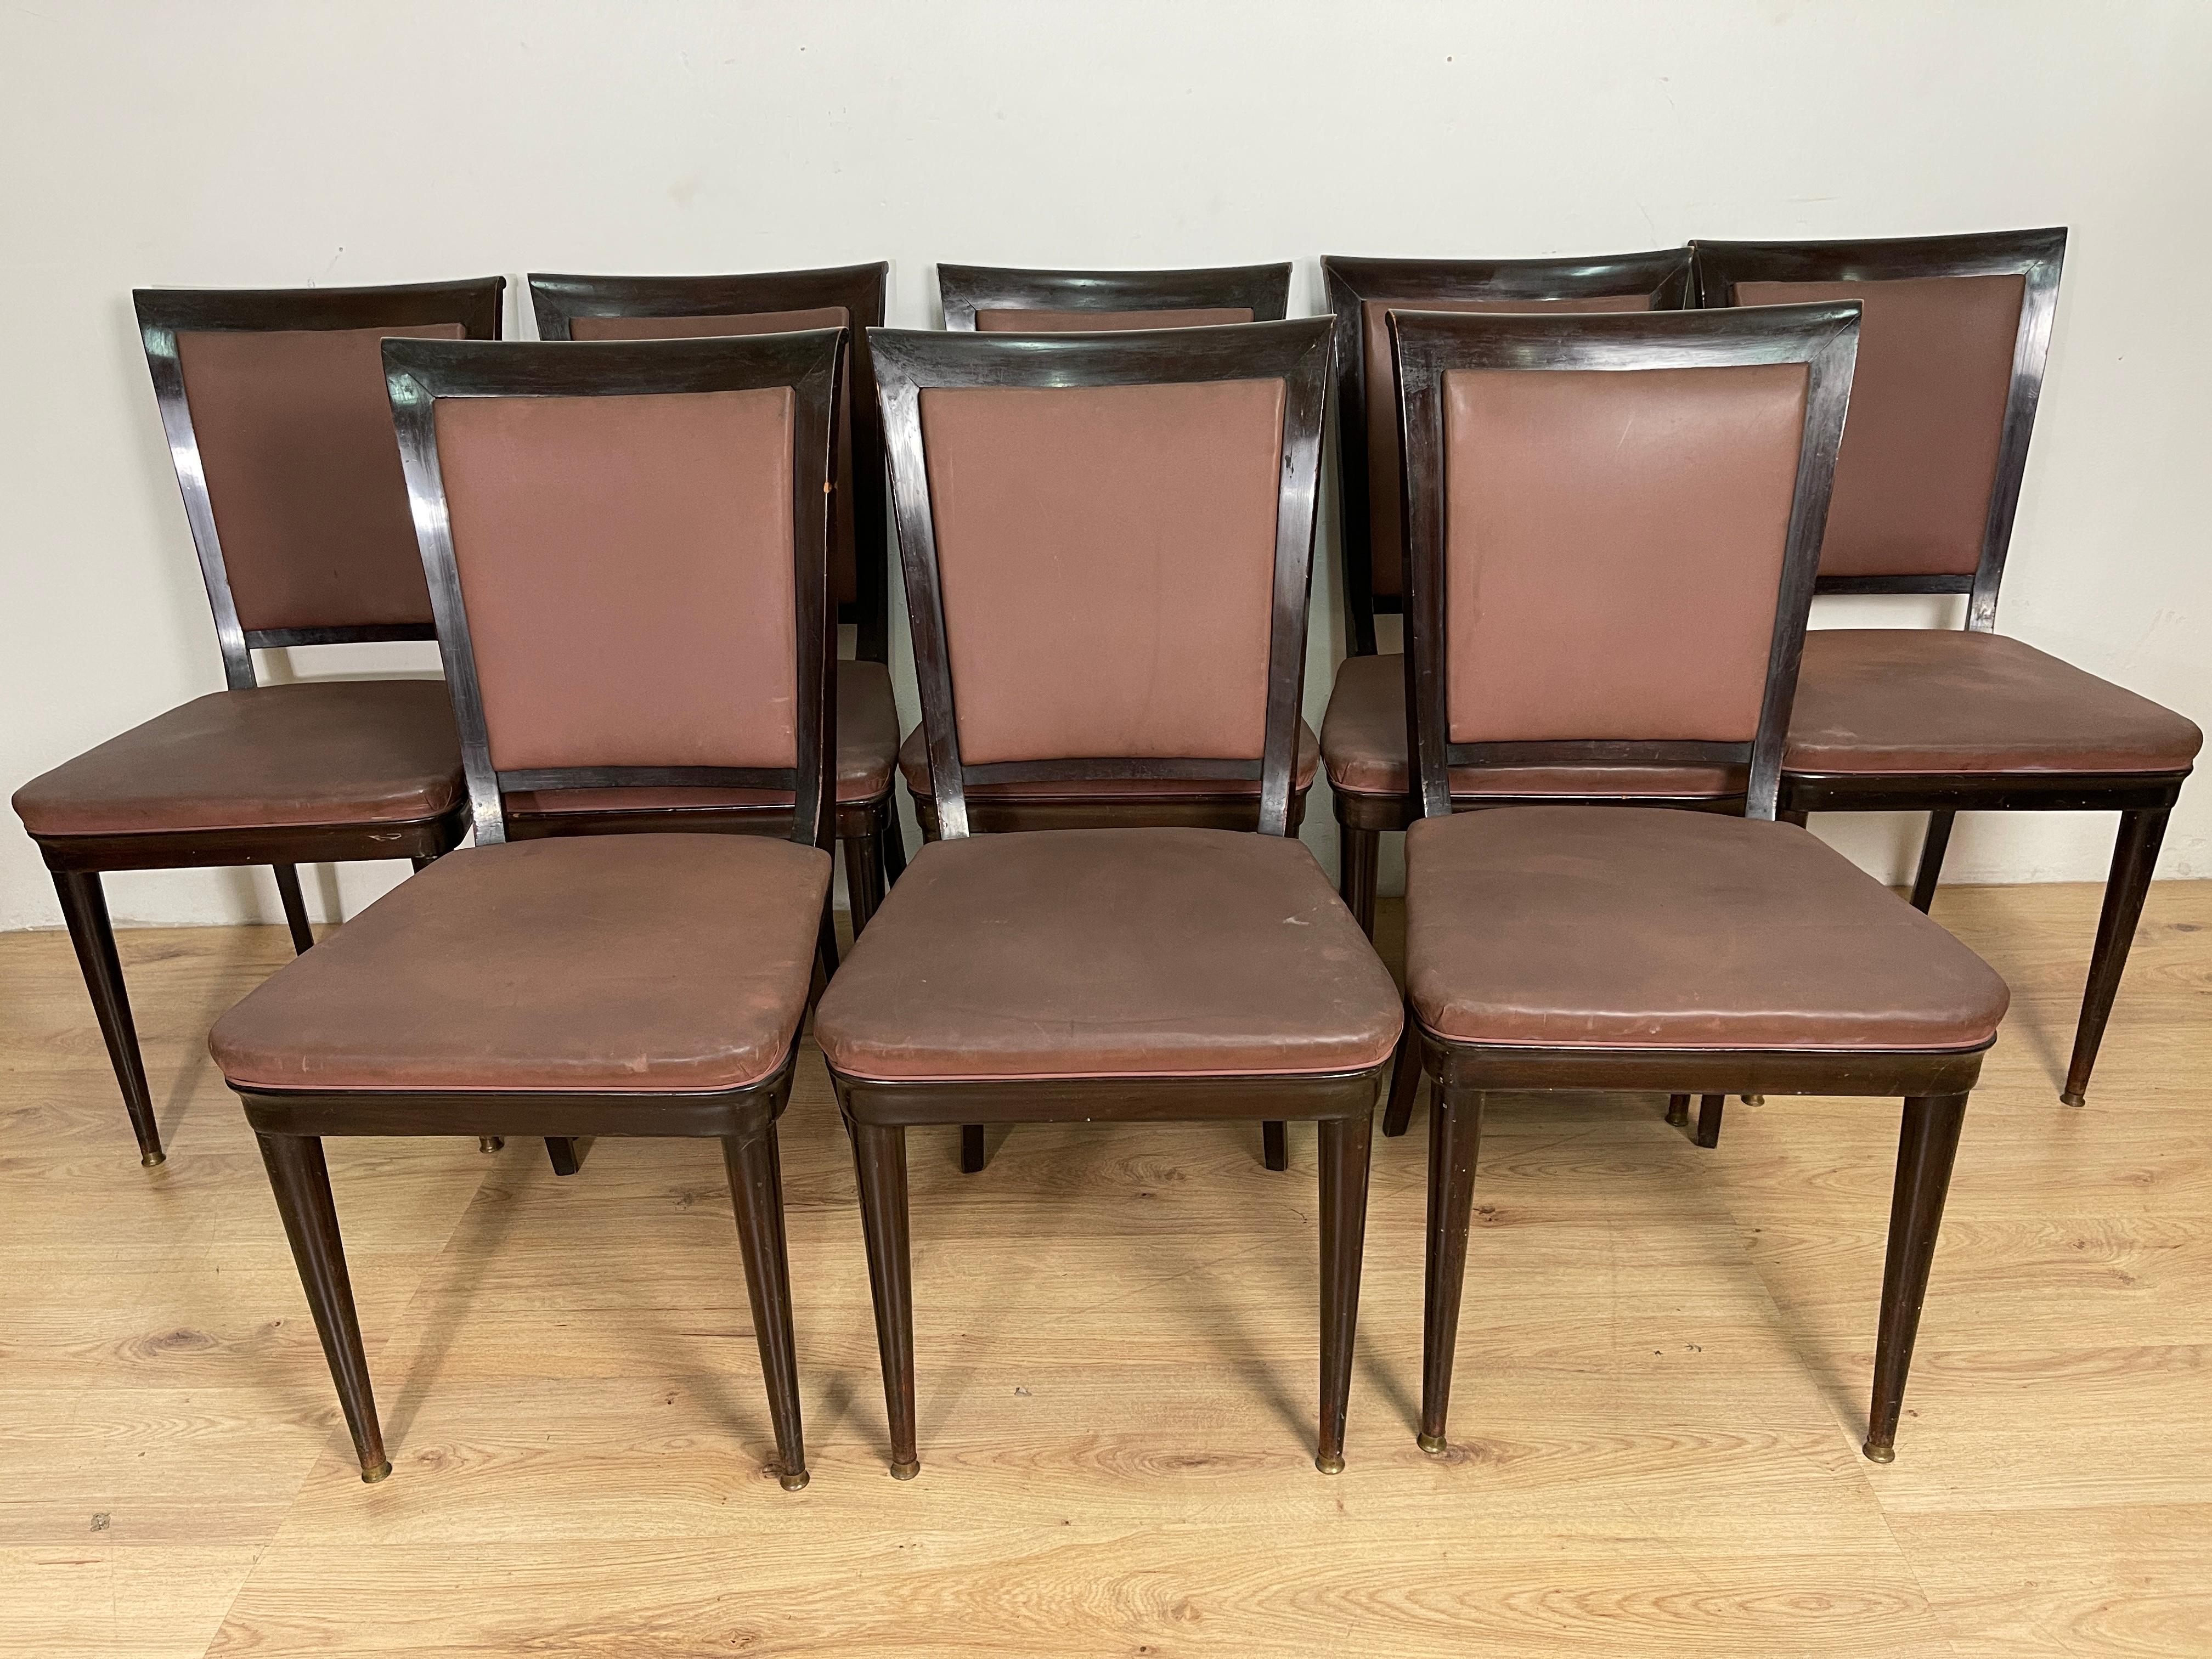 Set of 8 wooden dining chairs with Italian production upholstery from the 1940s attributable to the designer Vittorio Dassi.